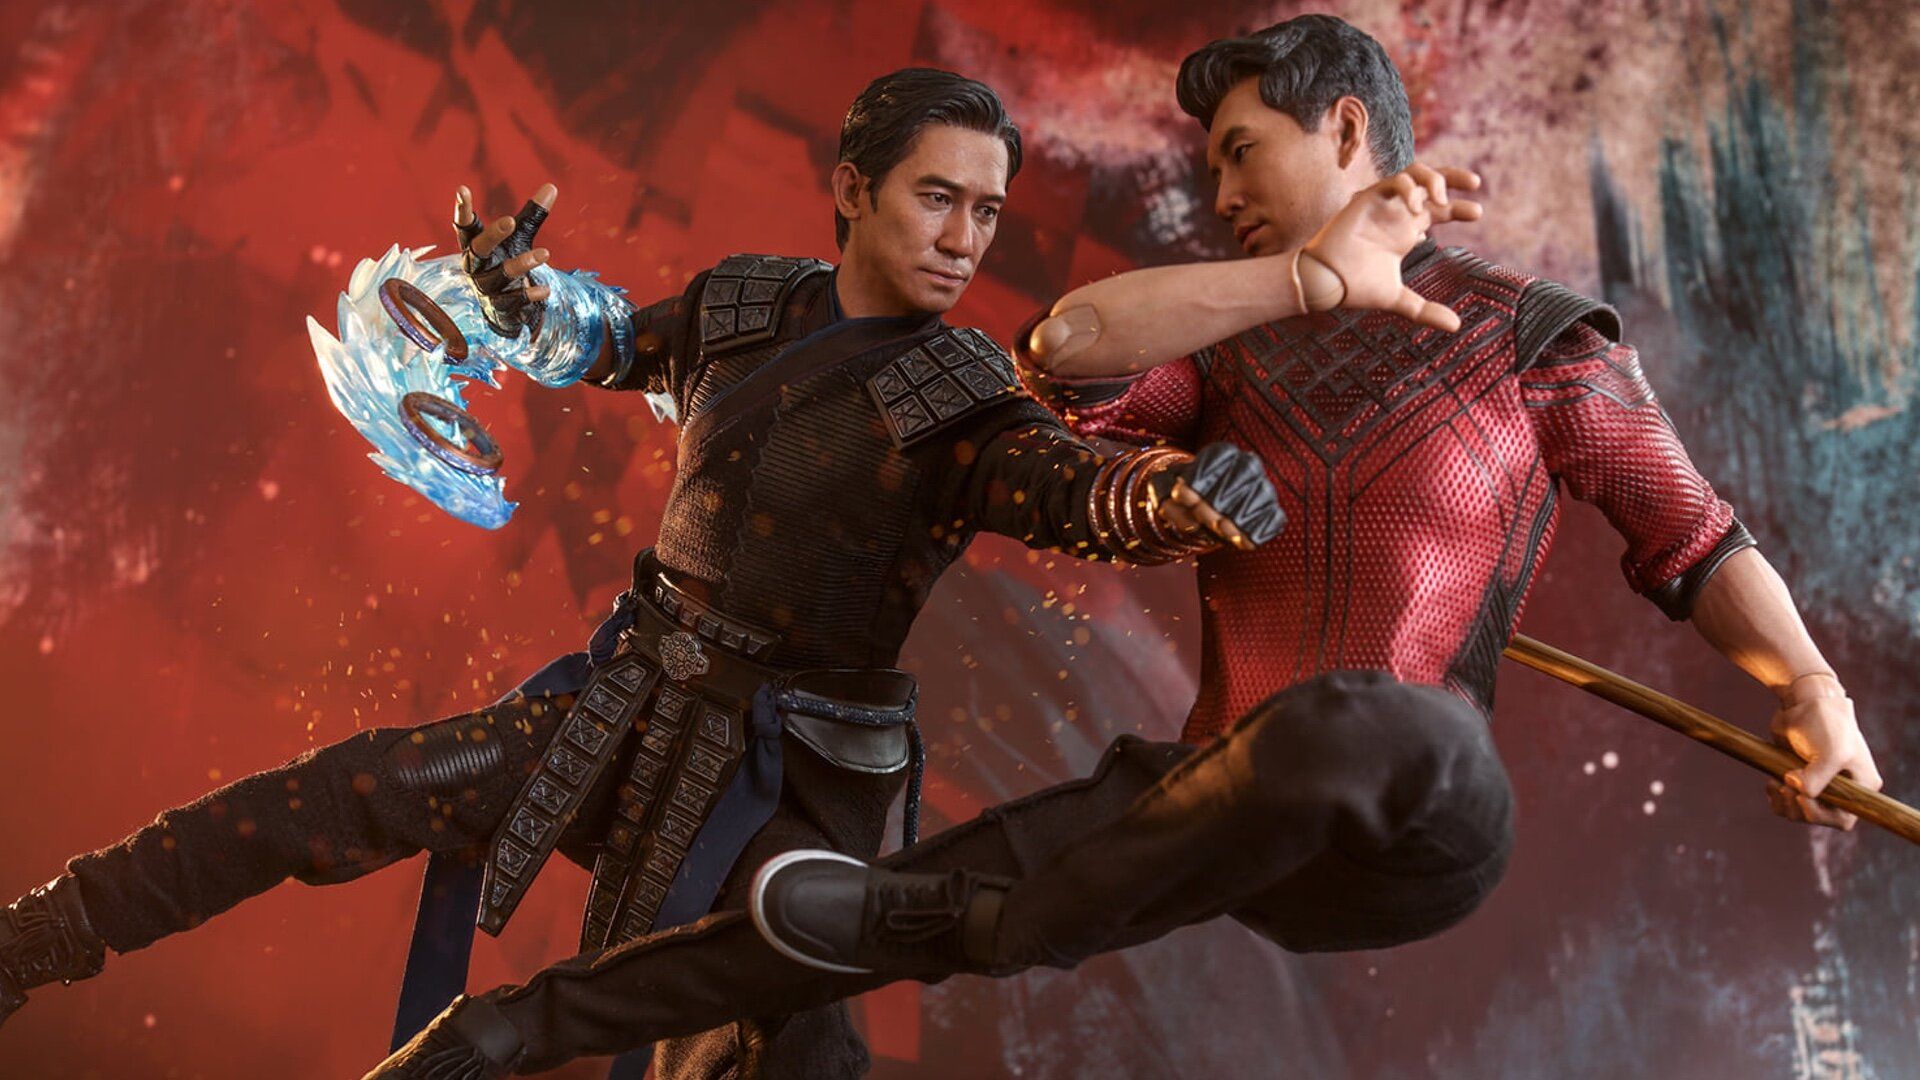 hot-toys-unveils-two-new-action-figures-for-shang-chi-and-the-legend-of-the-ten-rings